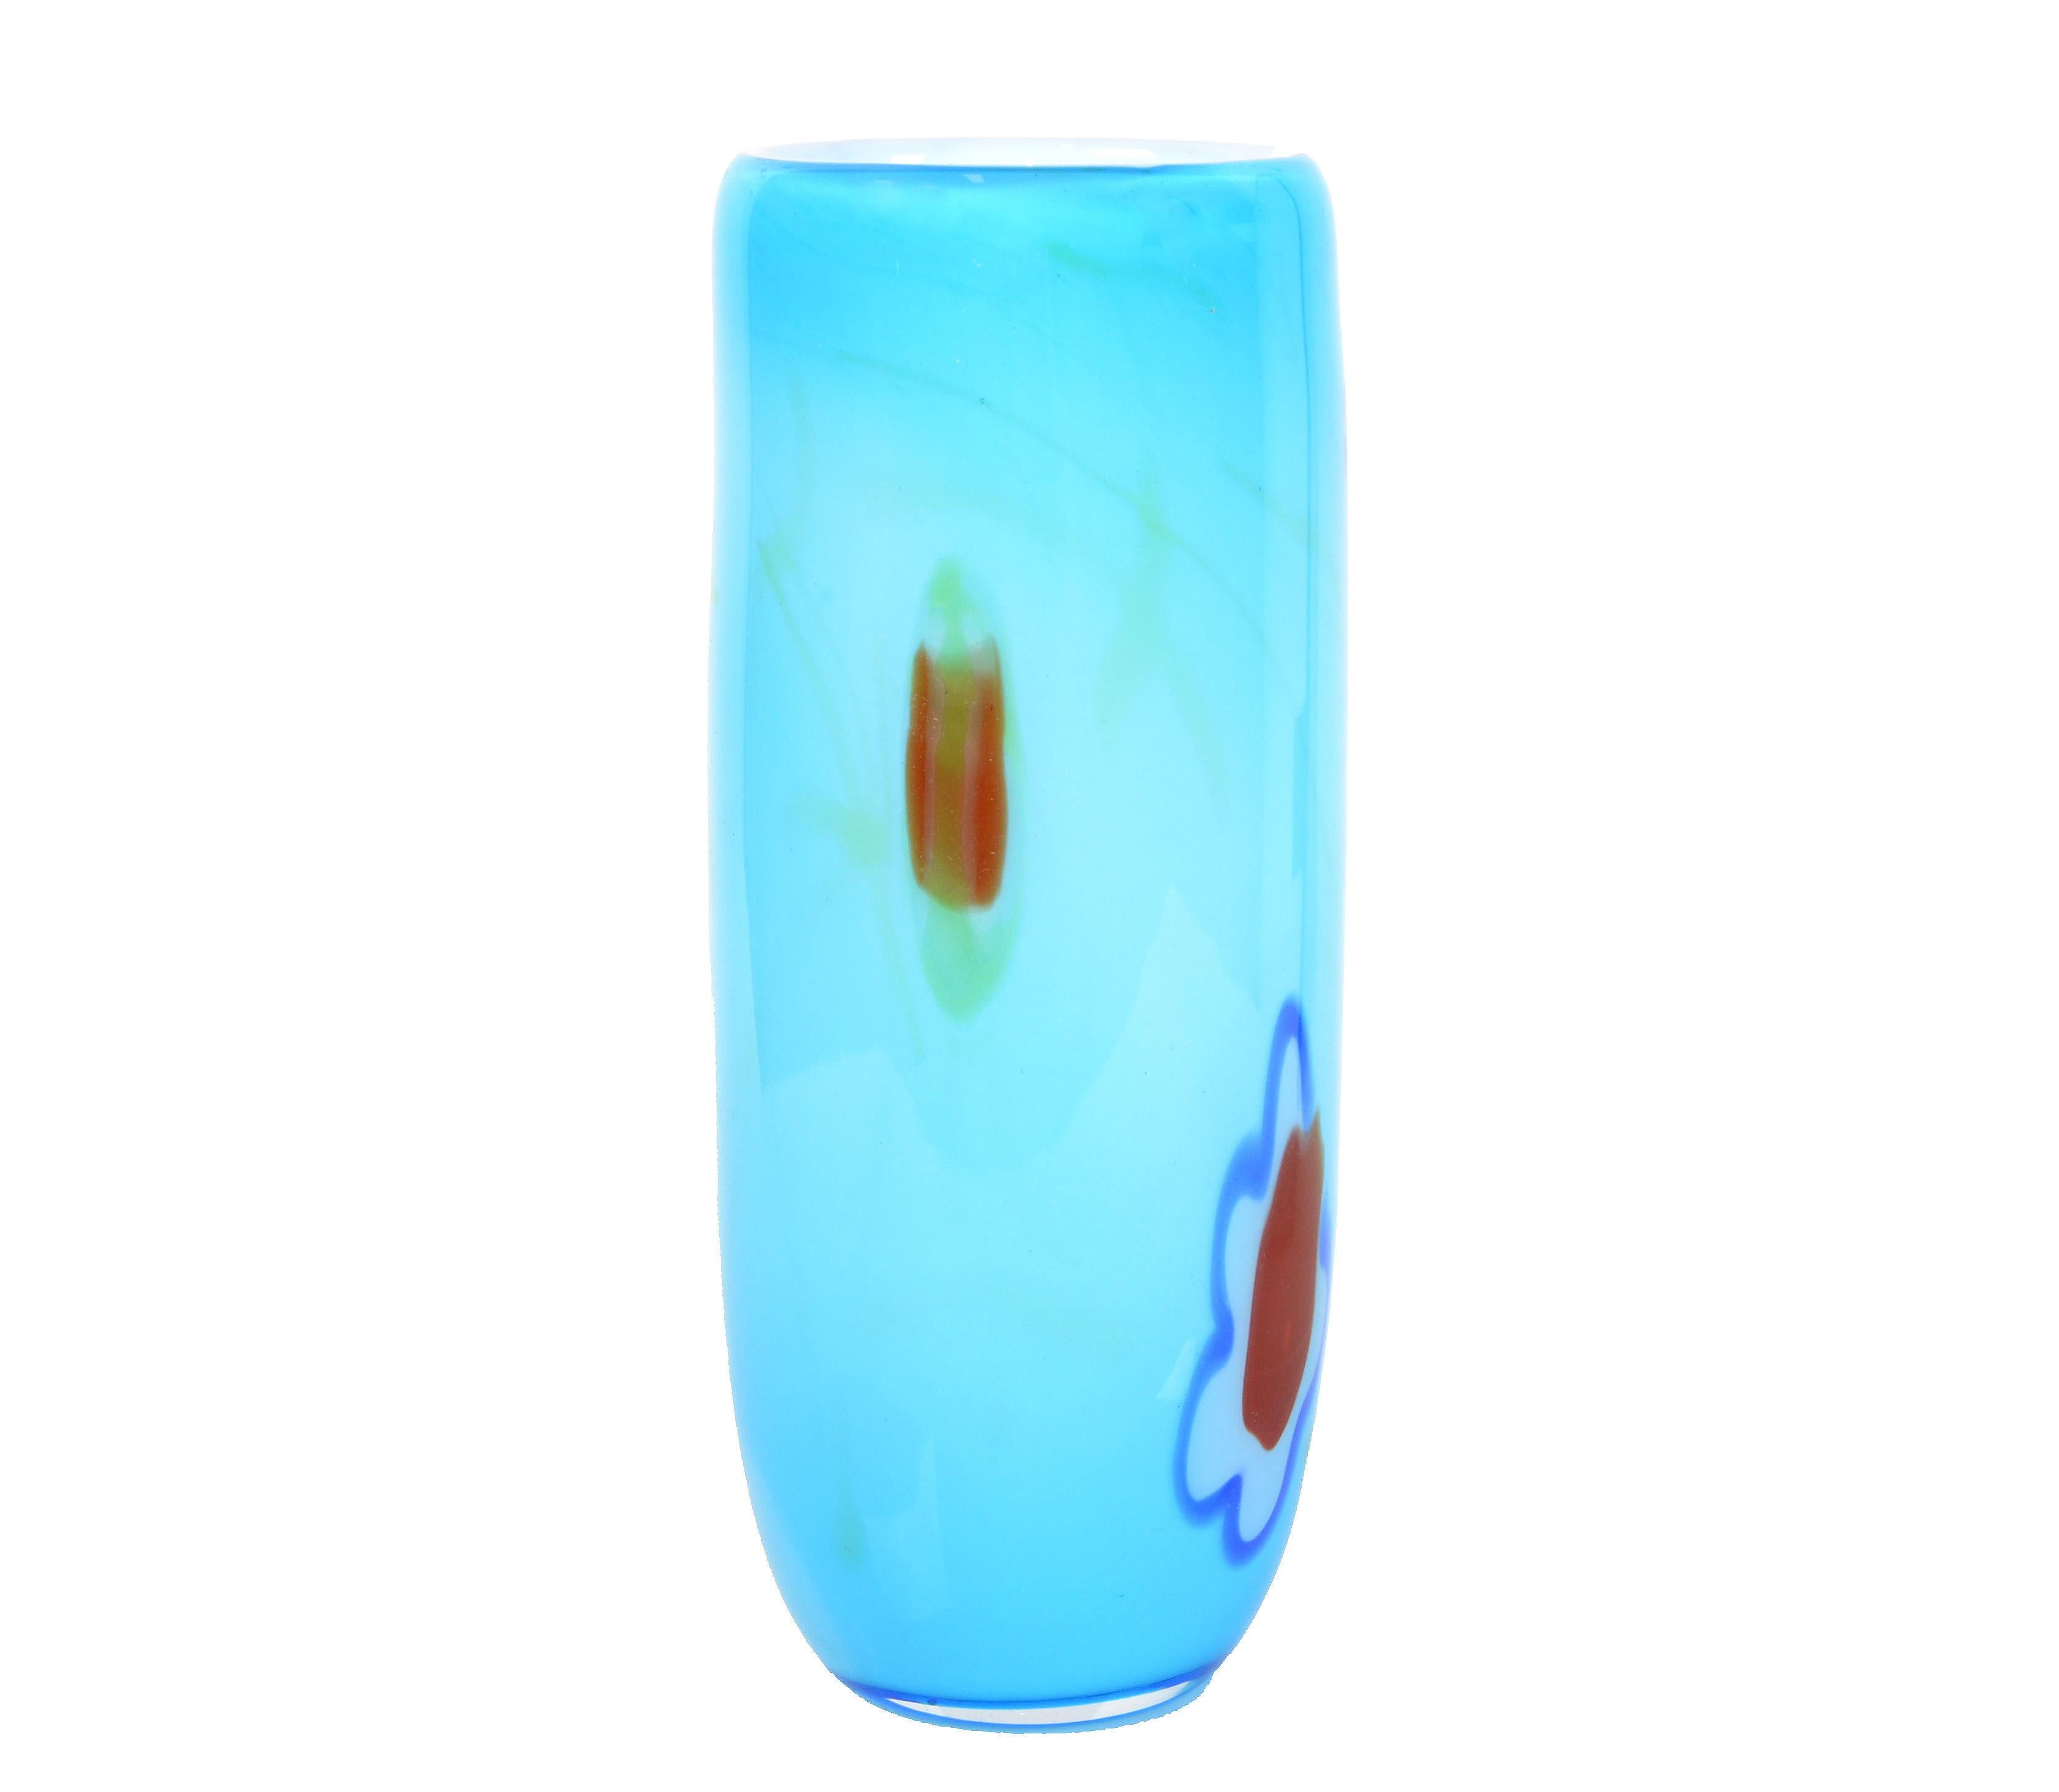 Hand-Crafted Mid-Century Modern Turquoise and White Blown Murano Art Glass Flower Vase, Italy